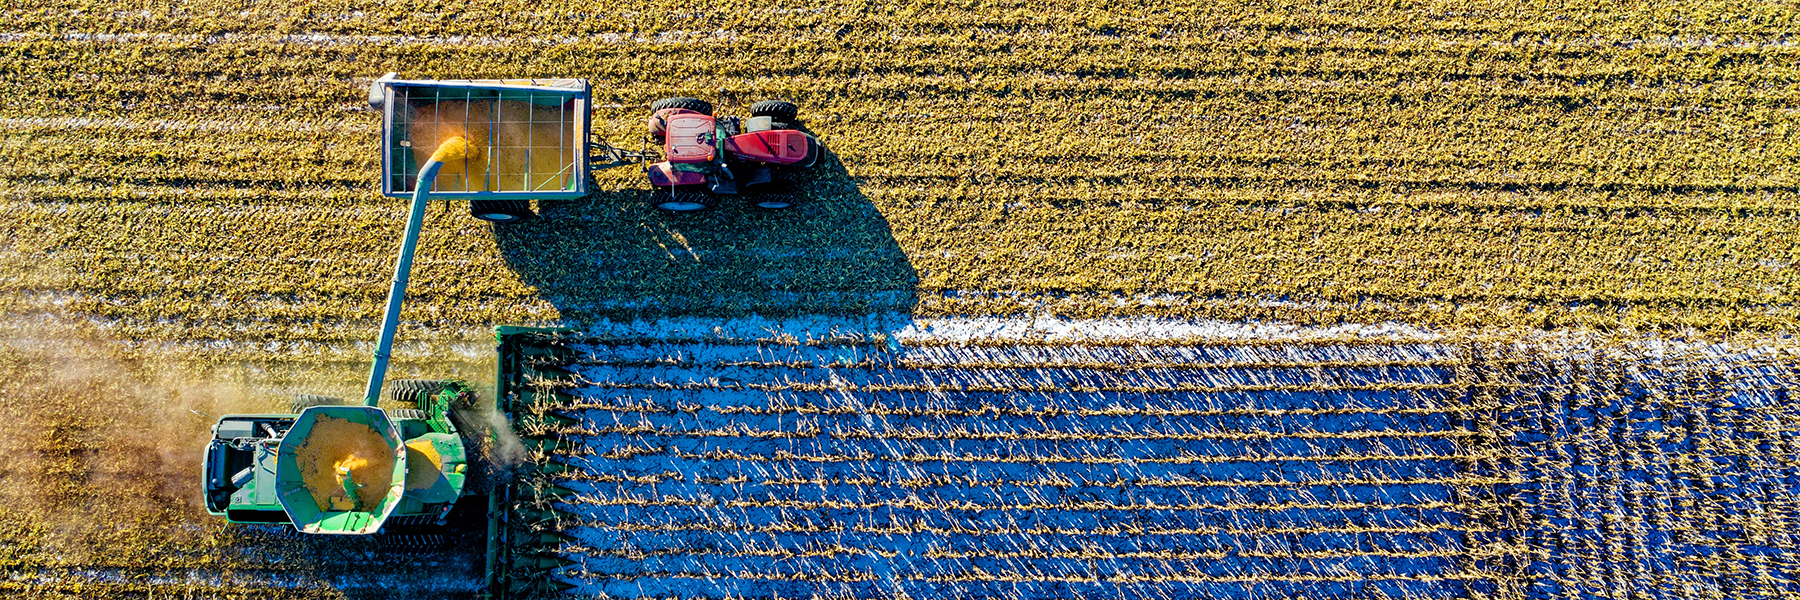 Top view of a farm field